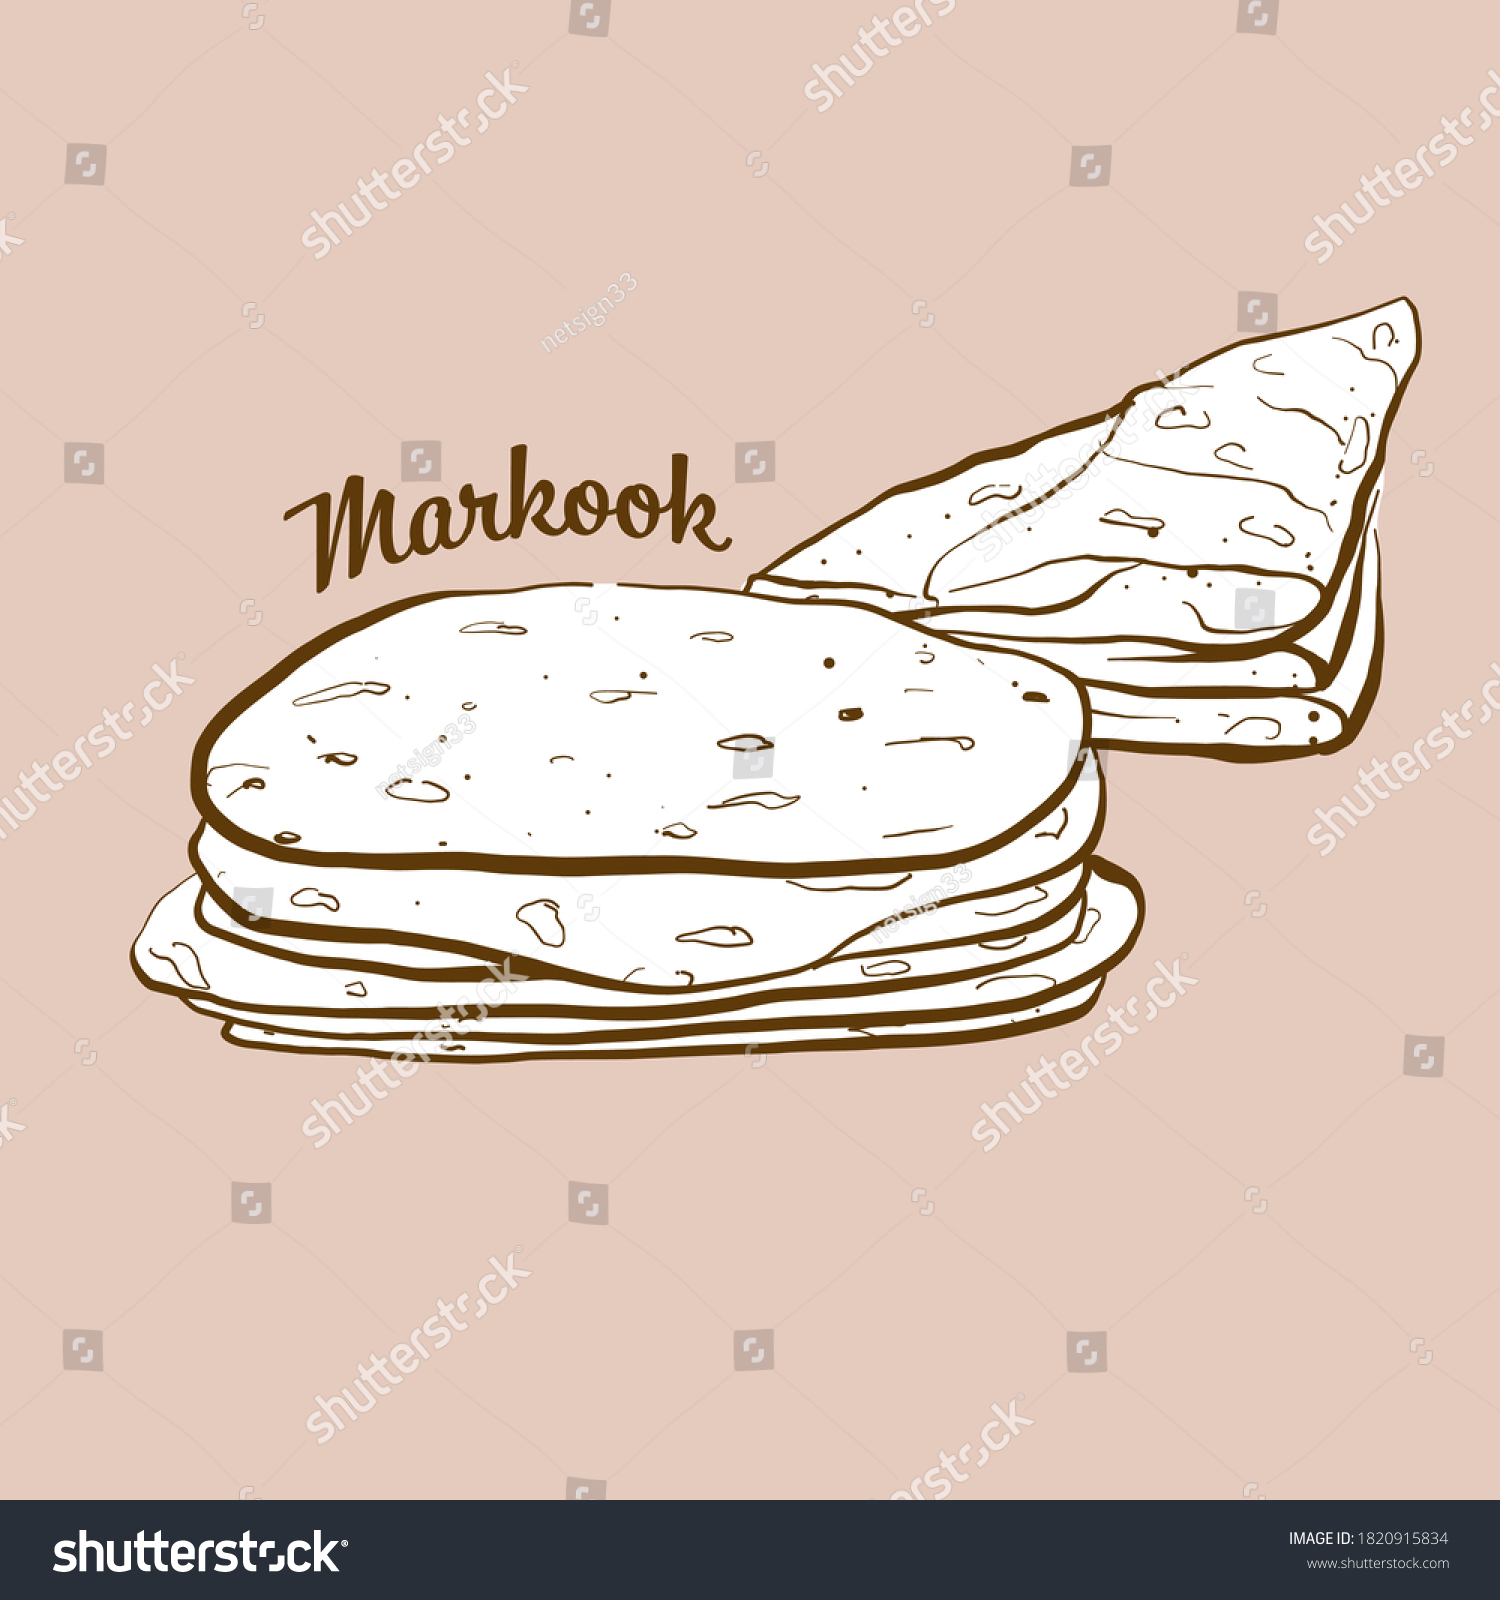 SVG of Hand-drawn Markook bread illustration. Flatbread, Saj bread, usually known in Levant. Vector drawing series. svg